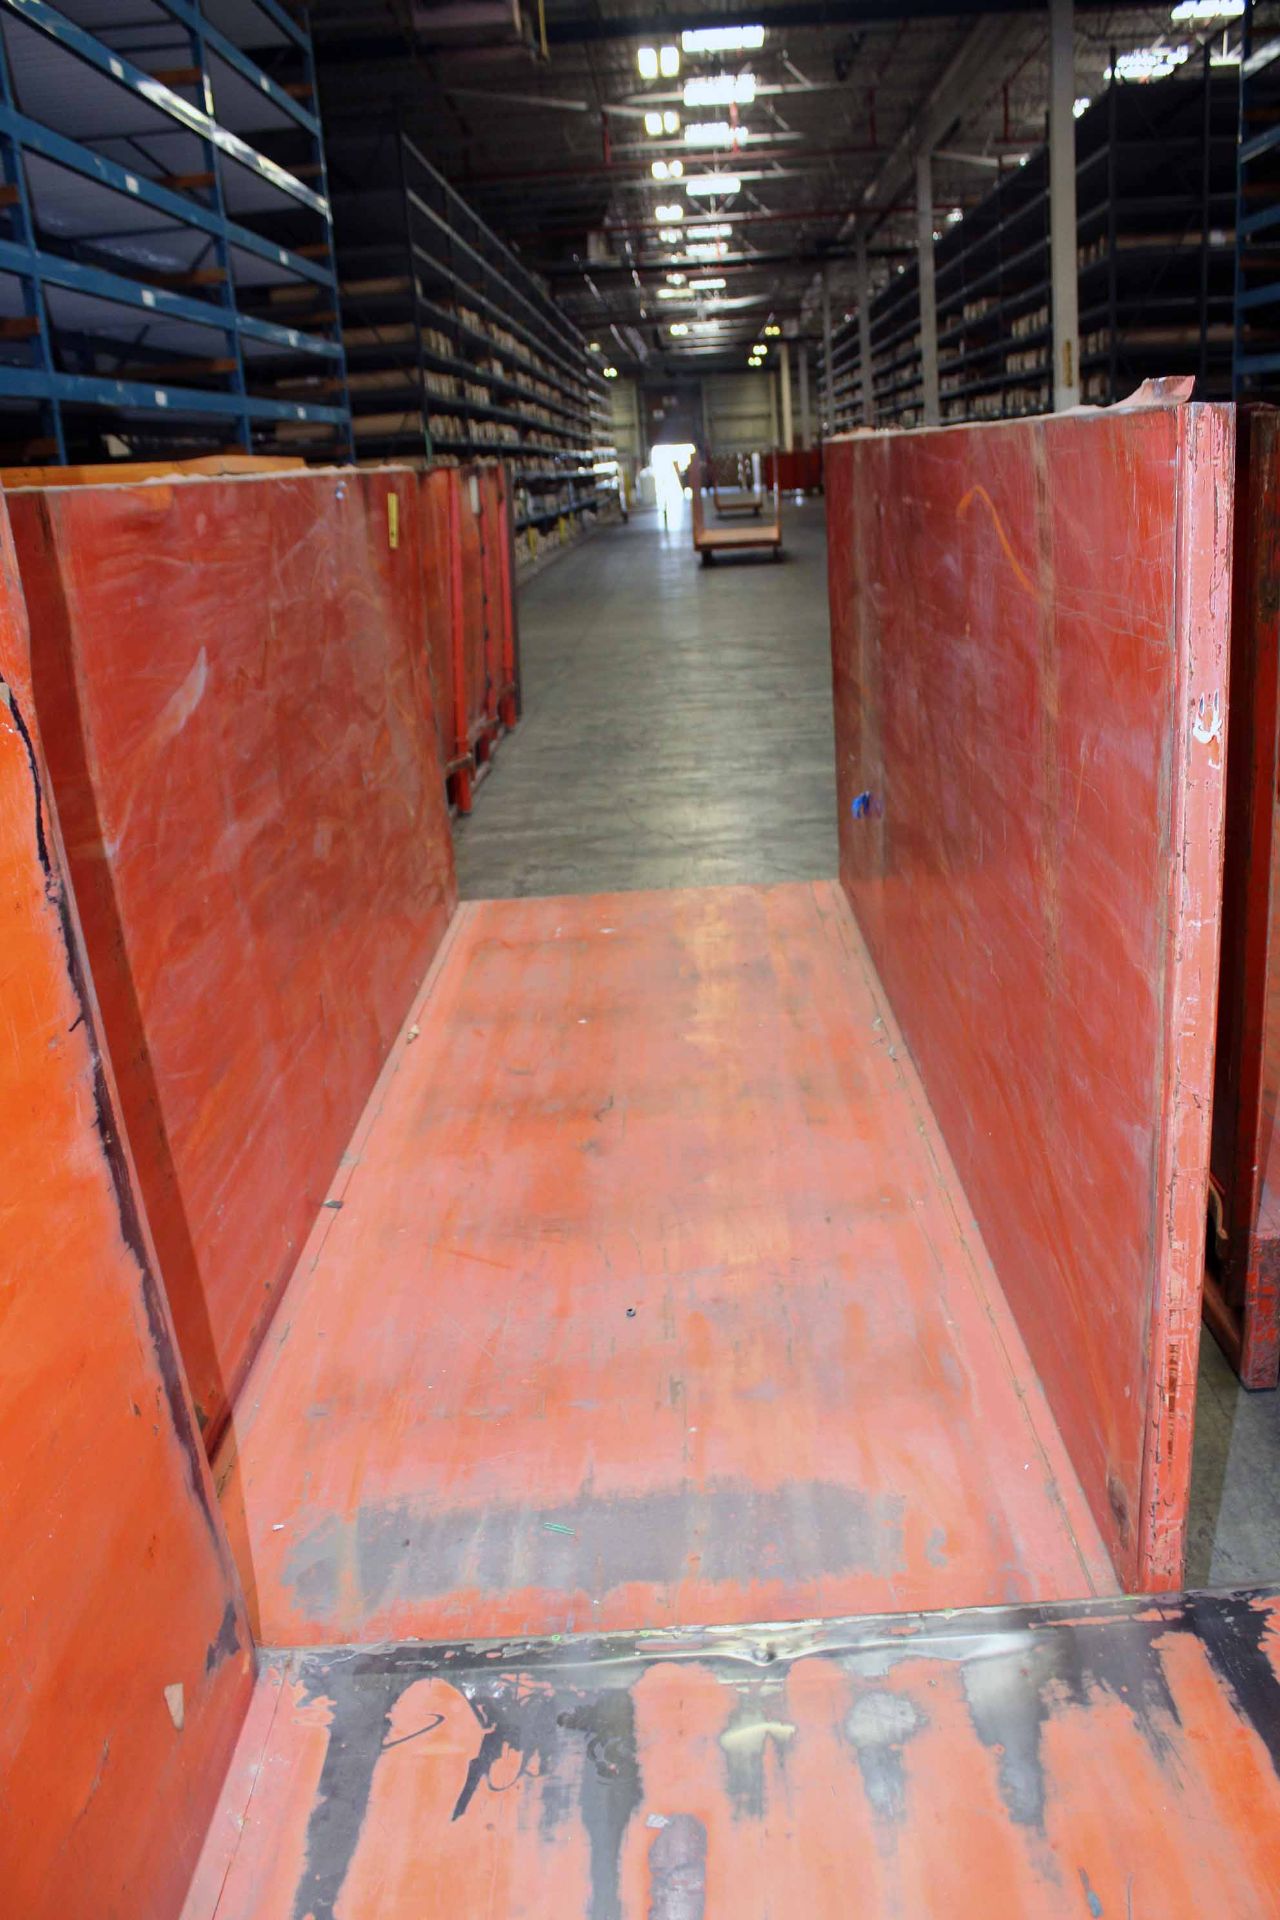 LOT OF MATERIAL TRANSPORT SKIDS (10), steel construction, approx. 5'W. x 12'L. x 6.5'ht.